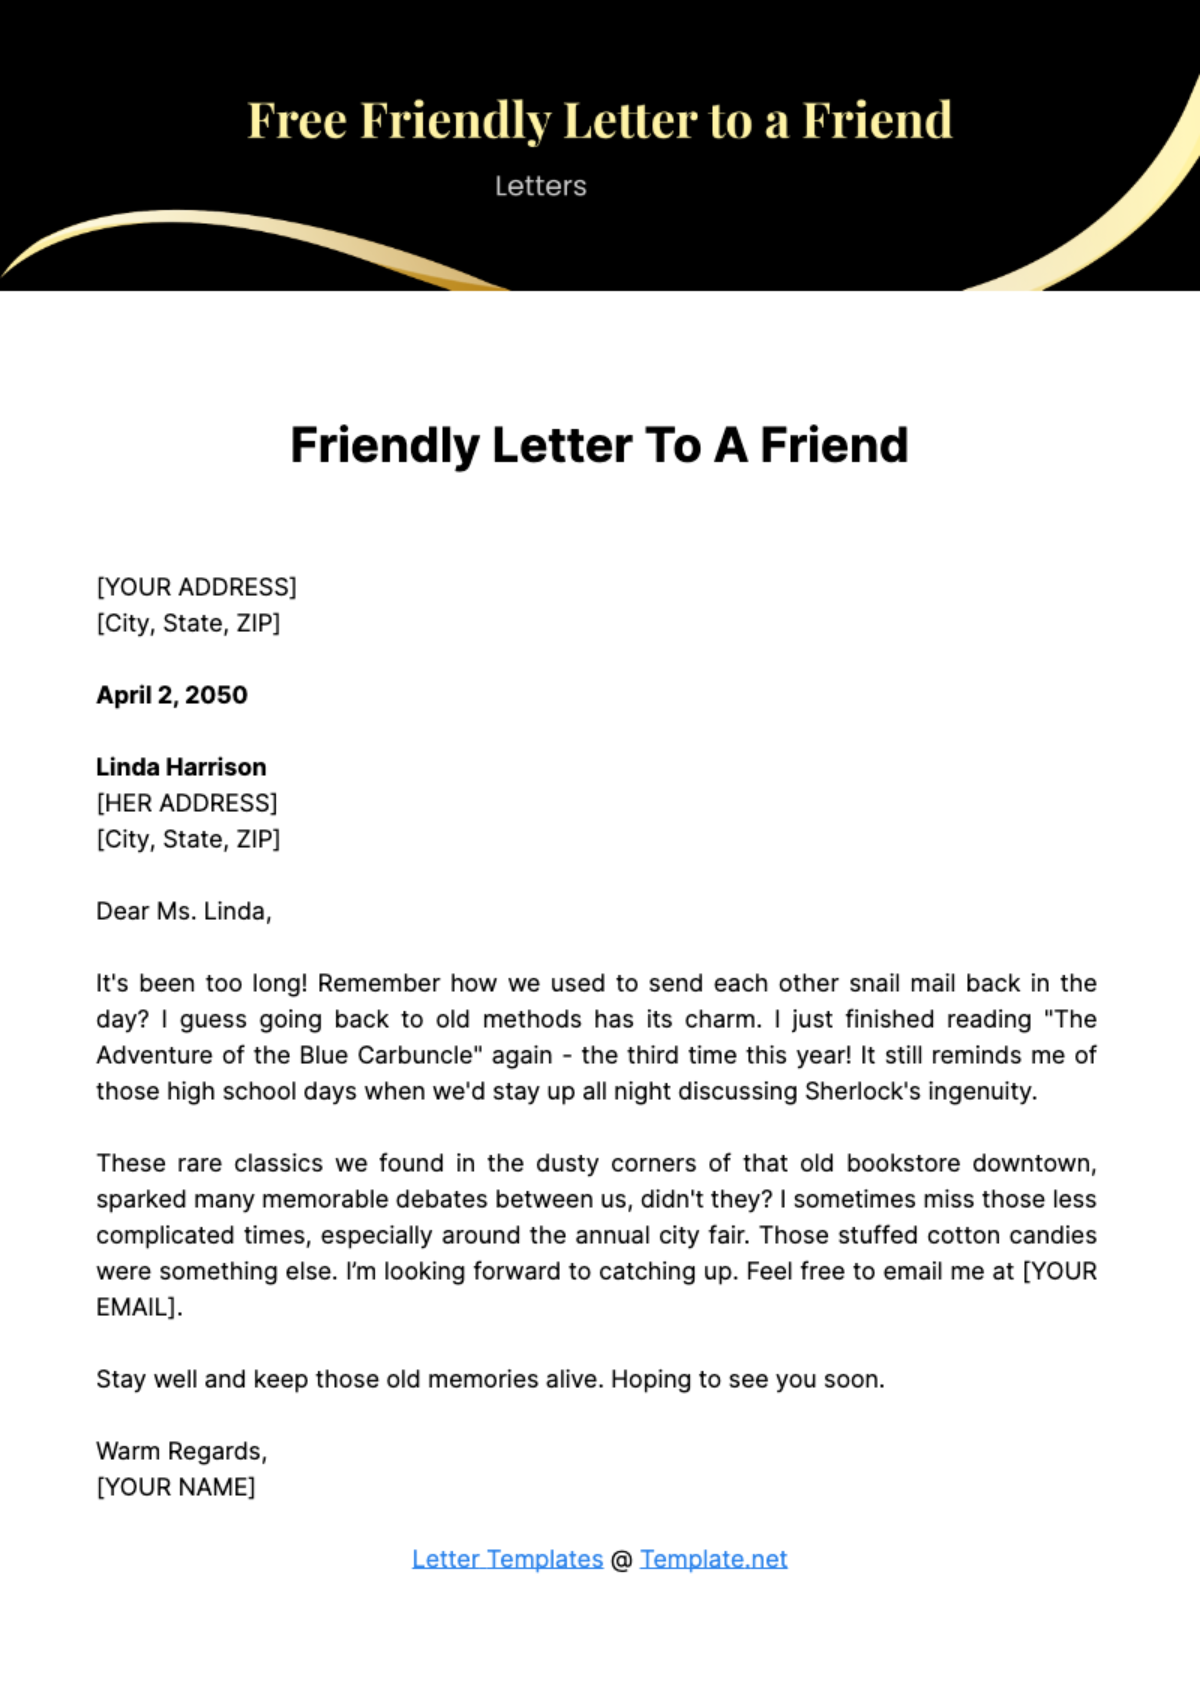 Free Friendly Letter to a Friend Template